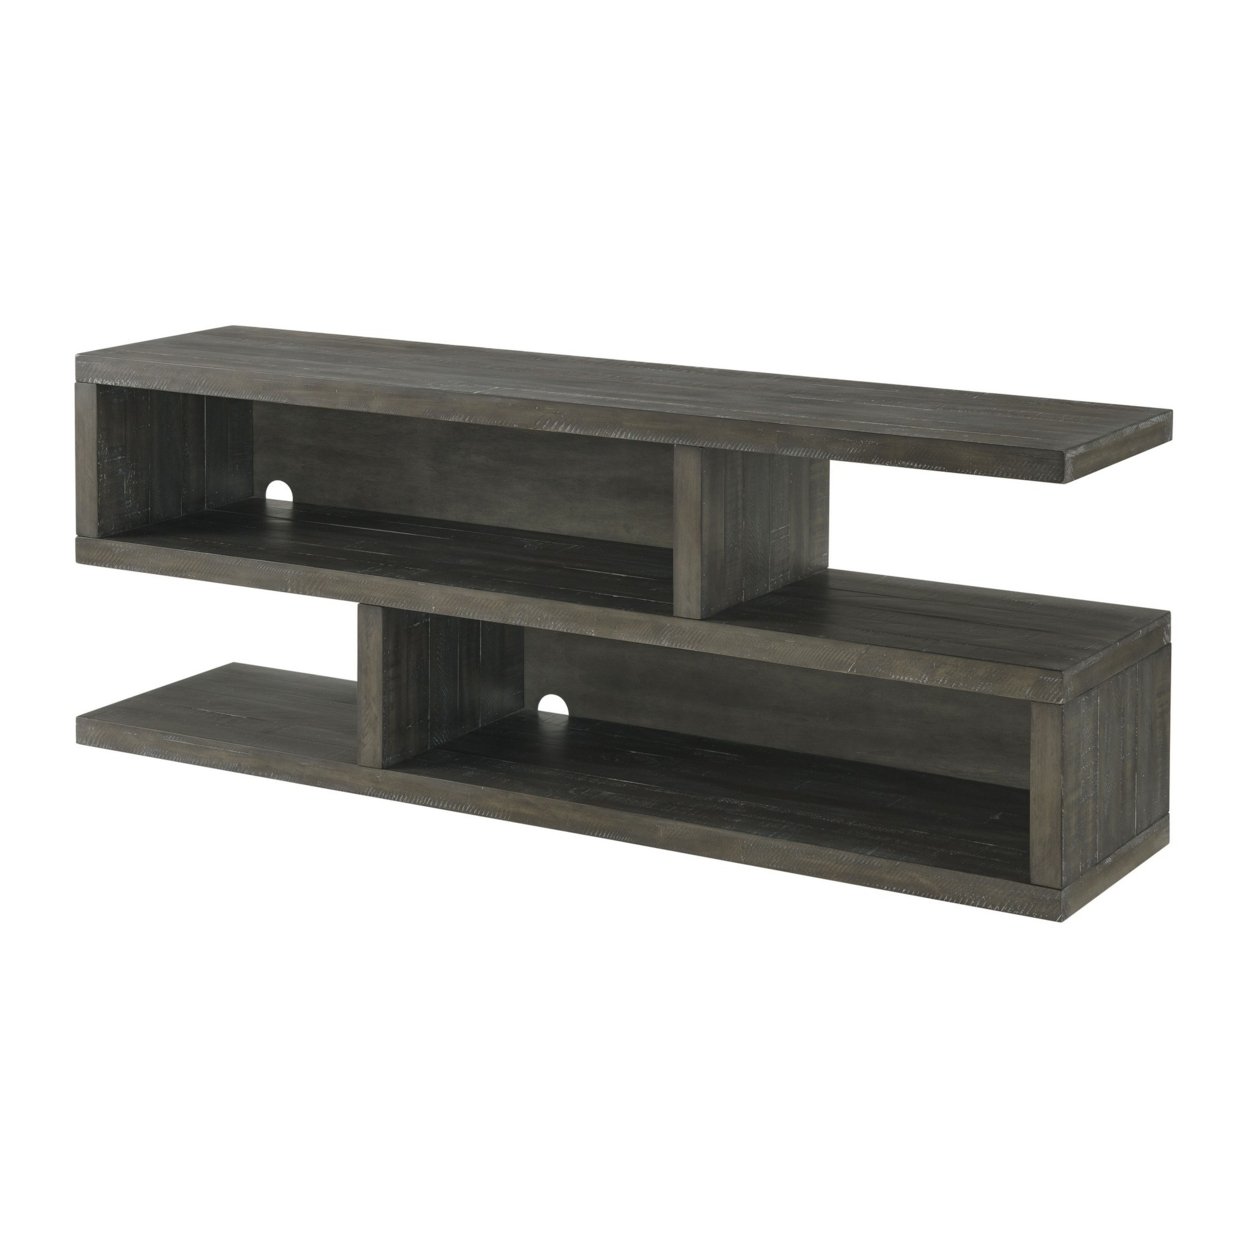 TV Stand With Cantilever Open Shelving And S Shape, Brown- Saltoro Sherpi